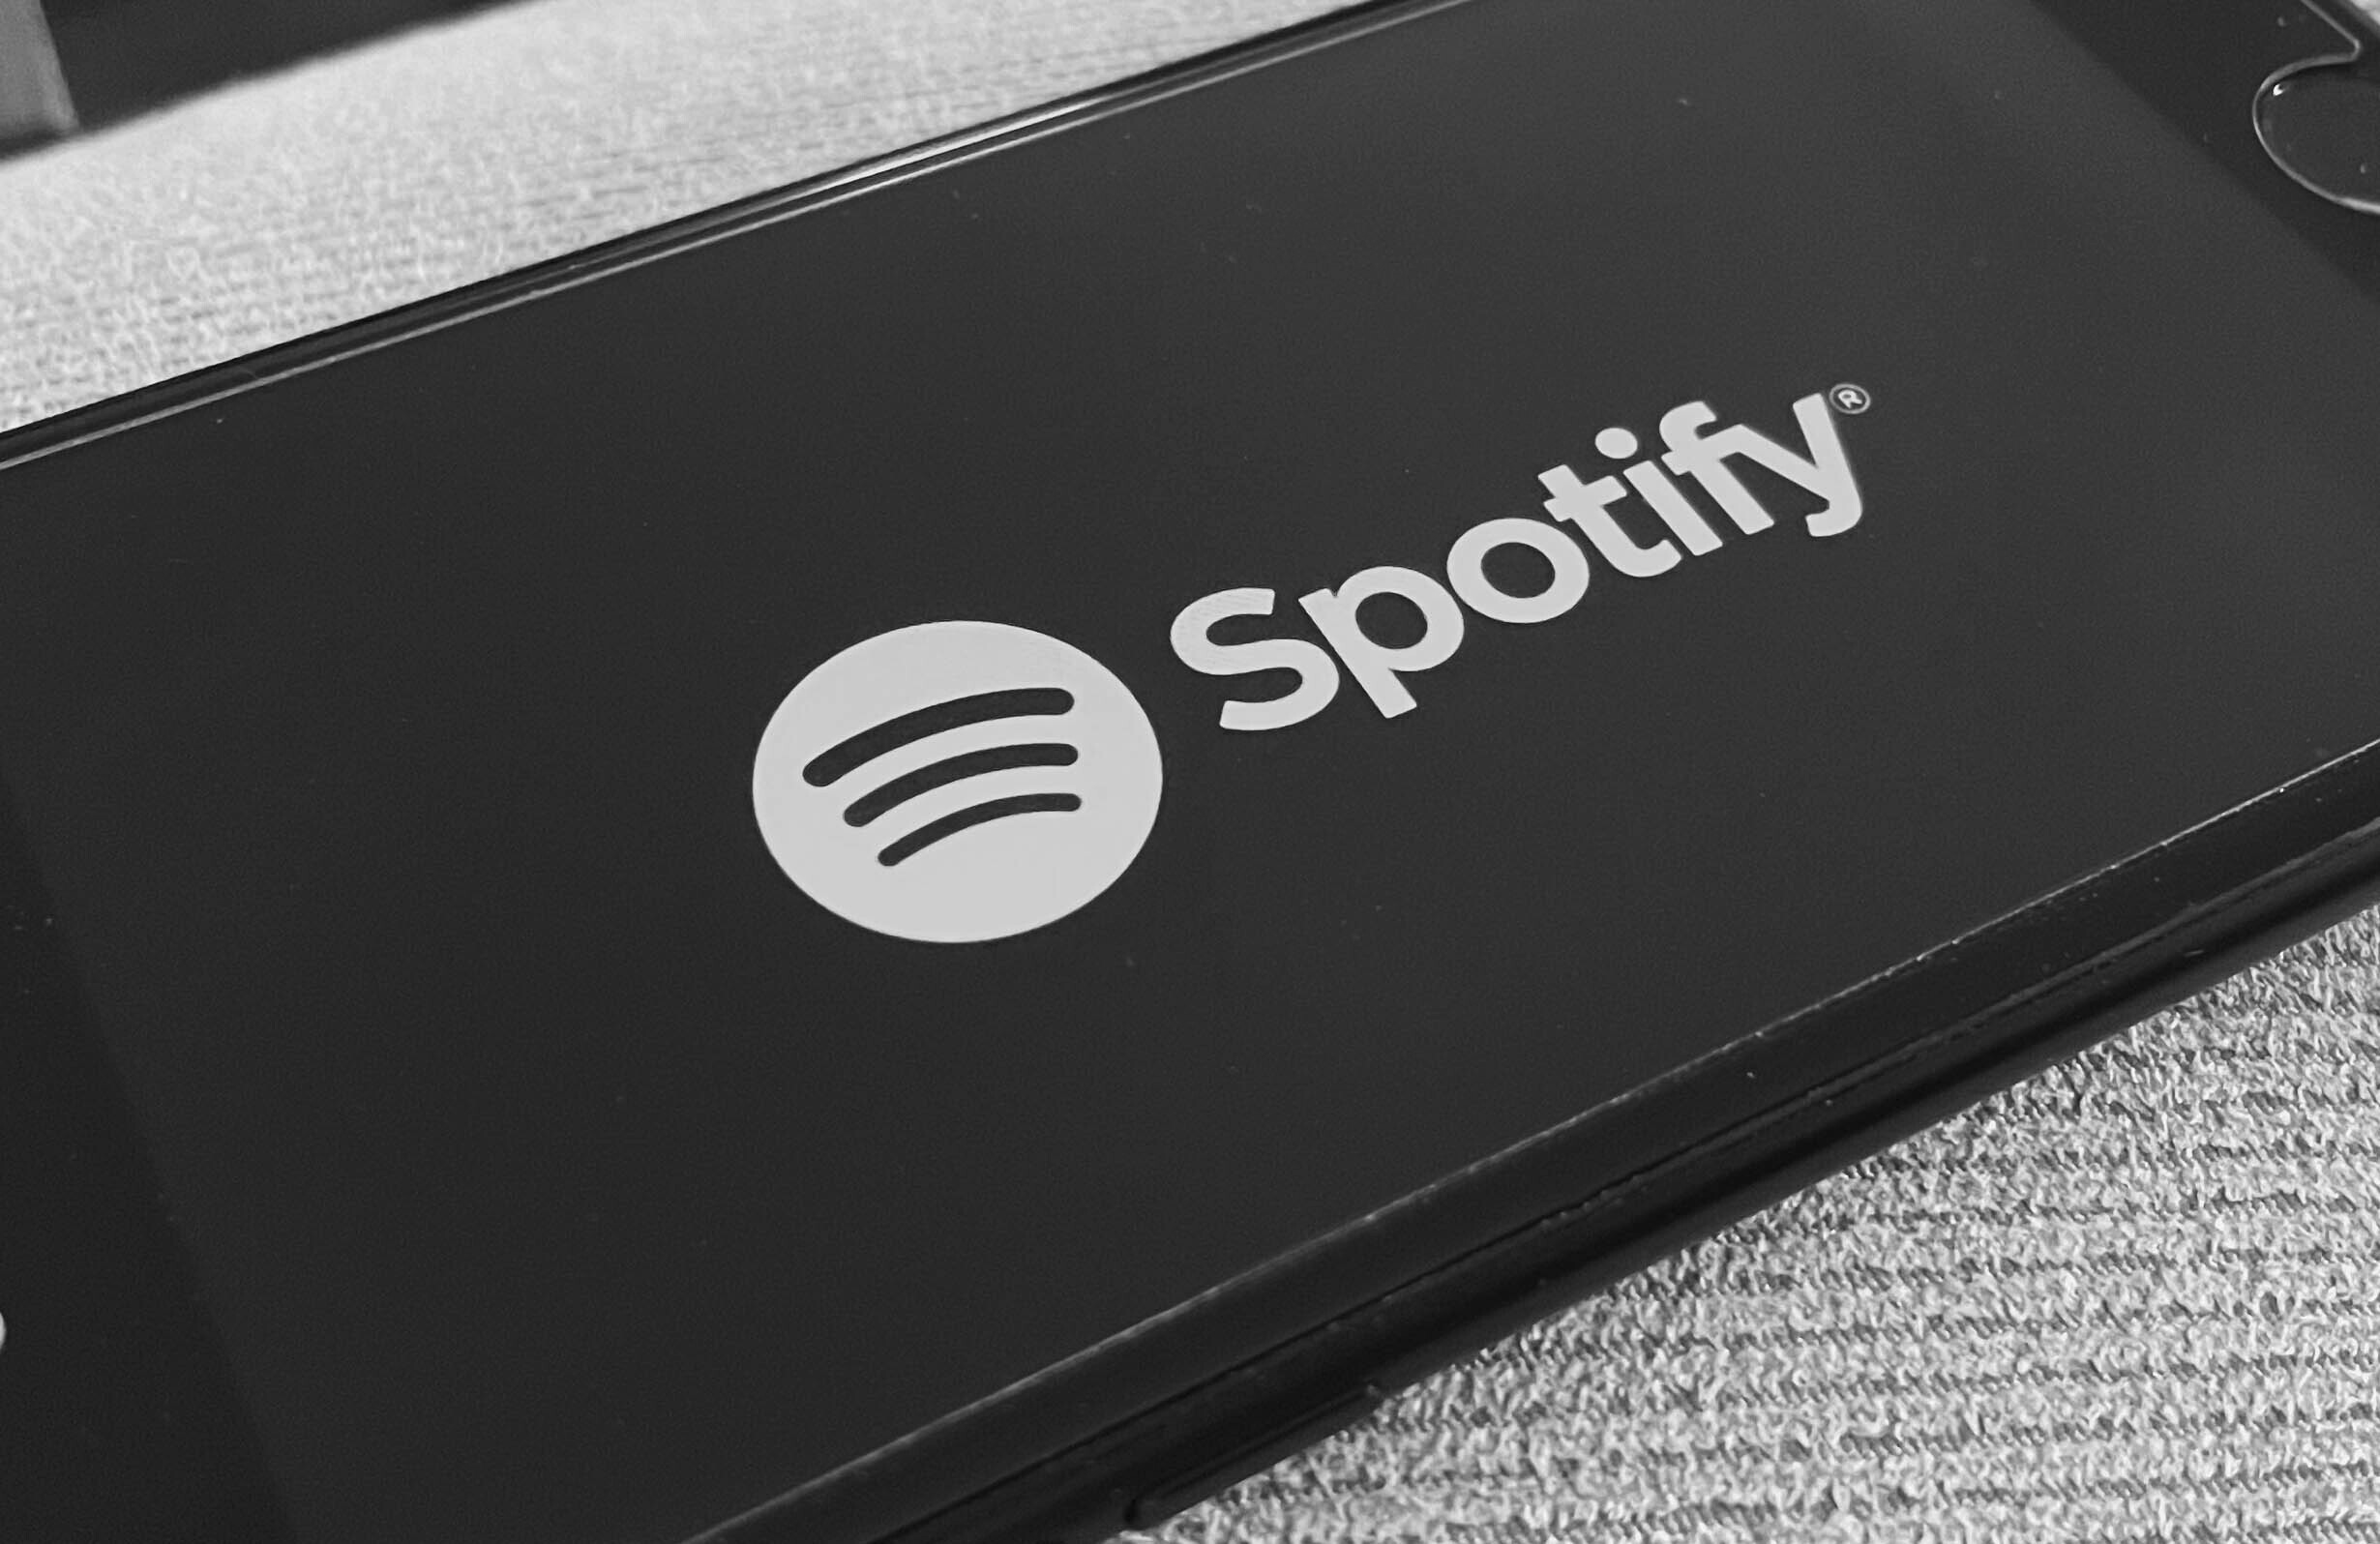 Spotify recently released their yearly Spotify Wrapped of most popular music.